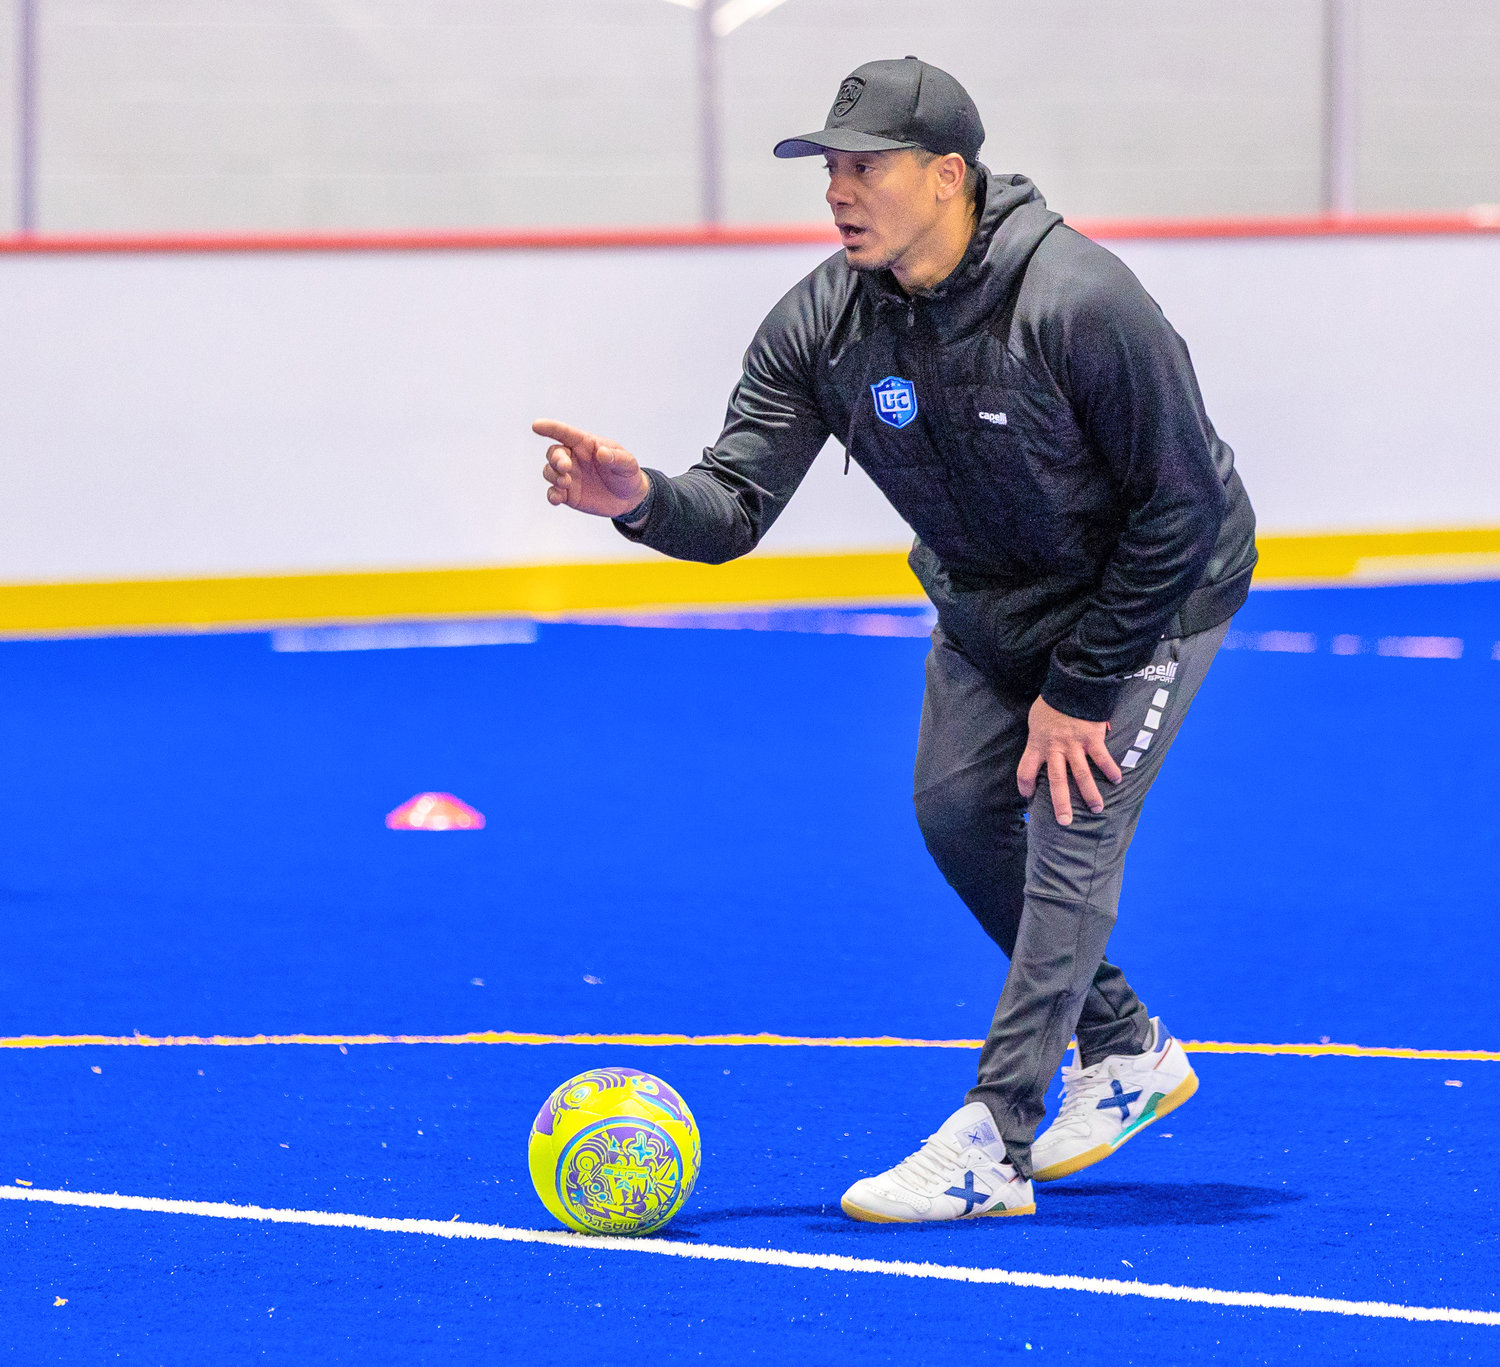 Hewerton Moreira, in his first year as the head coach of Utica City FC, offers instruction at practice earlier this week. The team lost its season-opener 8-7 in Baltimore and plays a road match against the Harrisburg Heat today. Then Utica will host Harrisburg in its home opener at 3 p.m. Sunday at the Adirondack Bank Center.